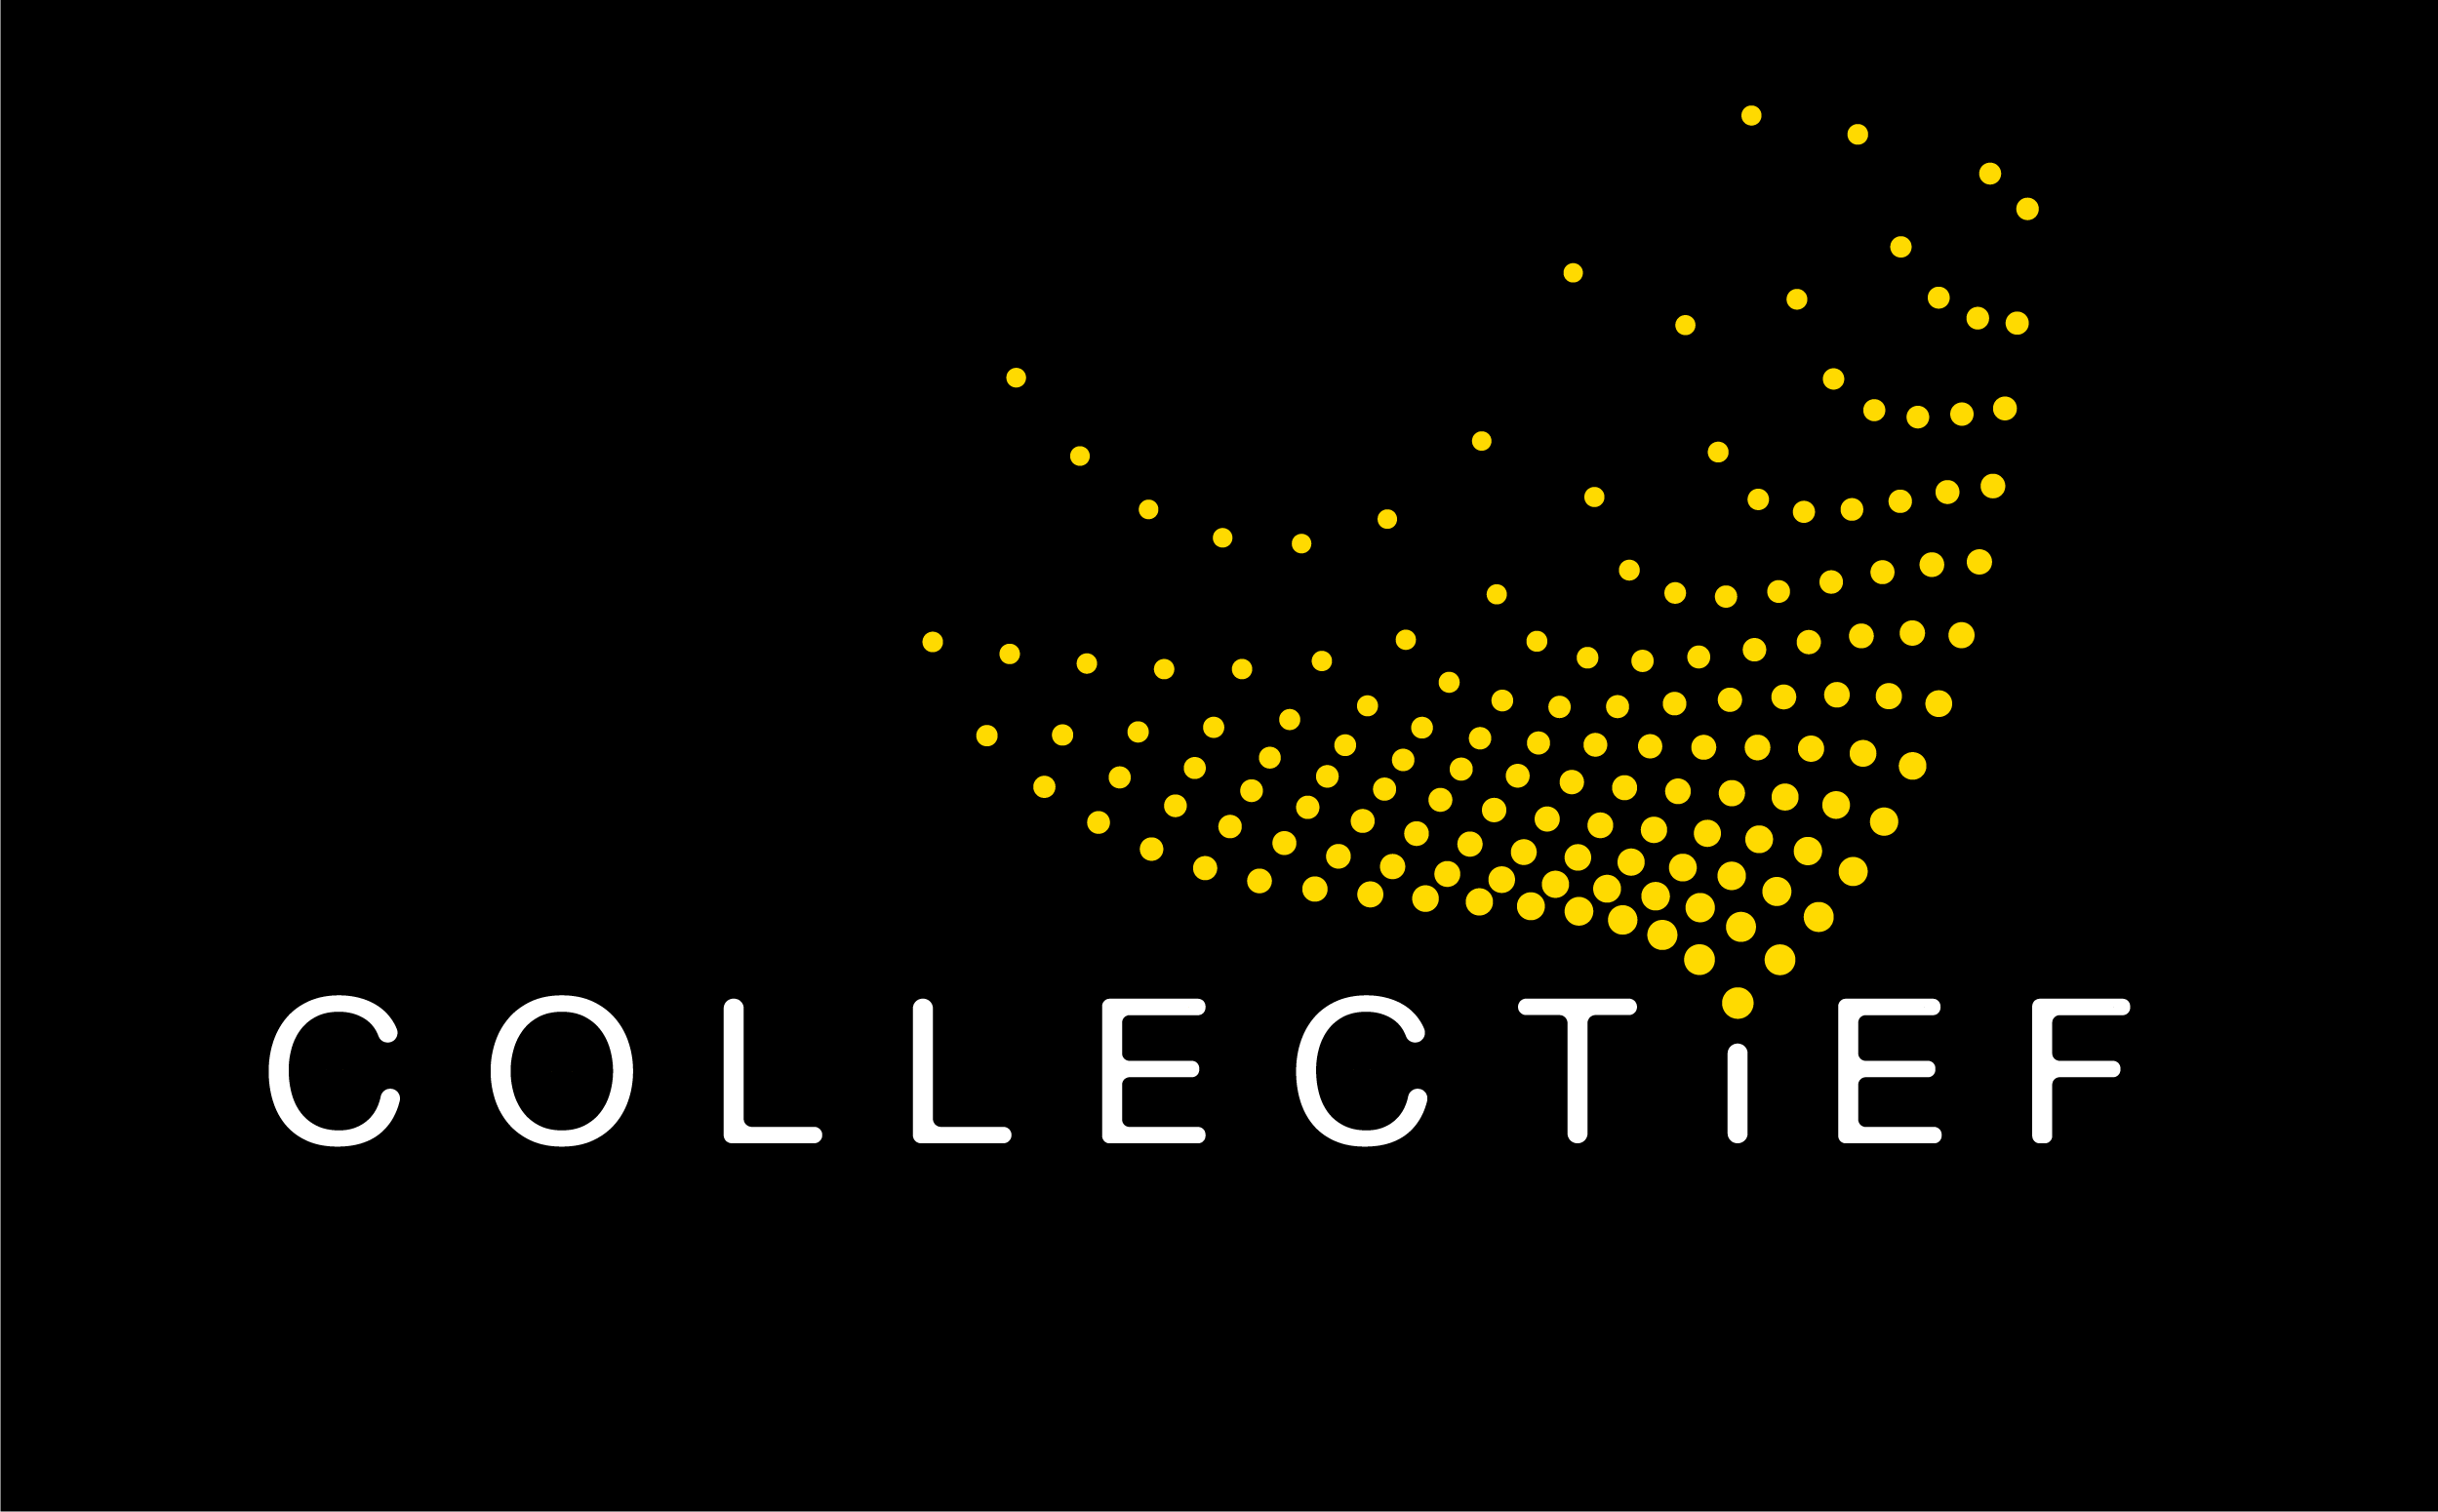 OUR NEW PROJECT COLLECTiEF LAUNCHED!